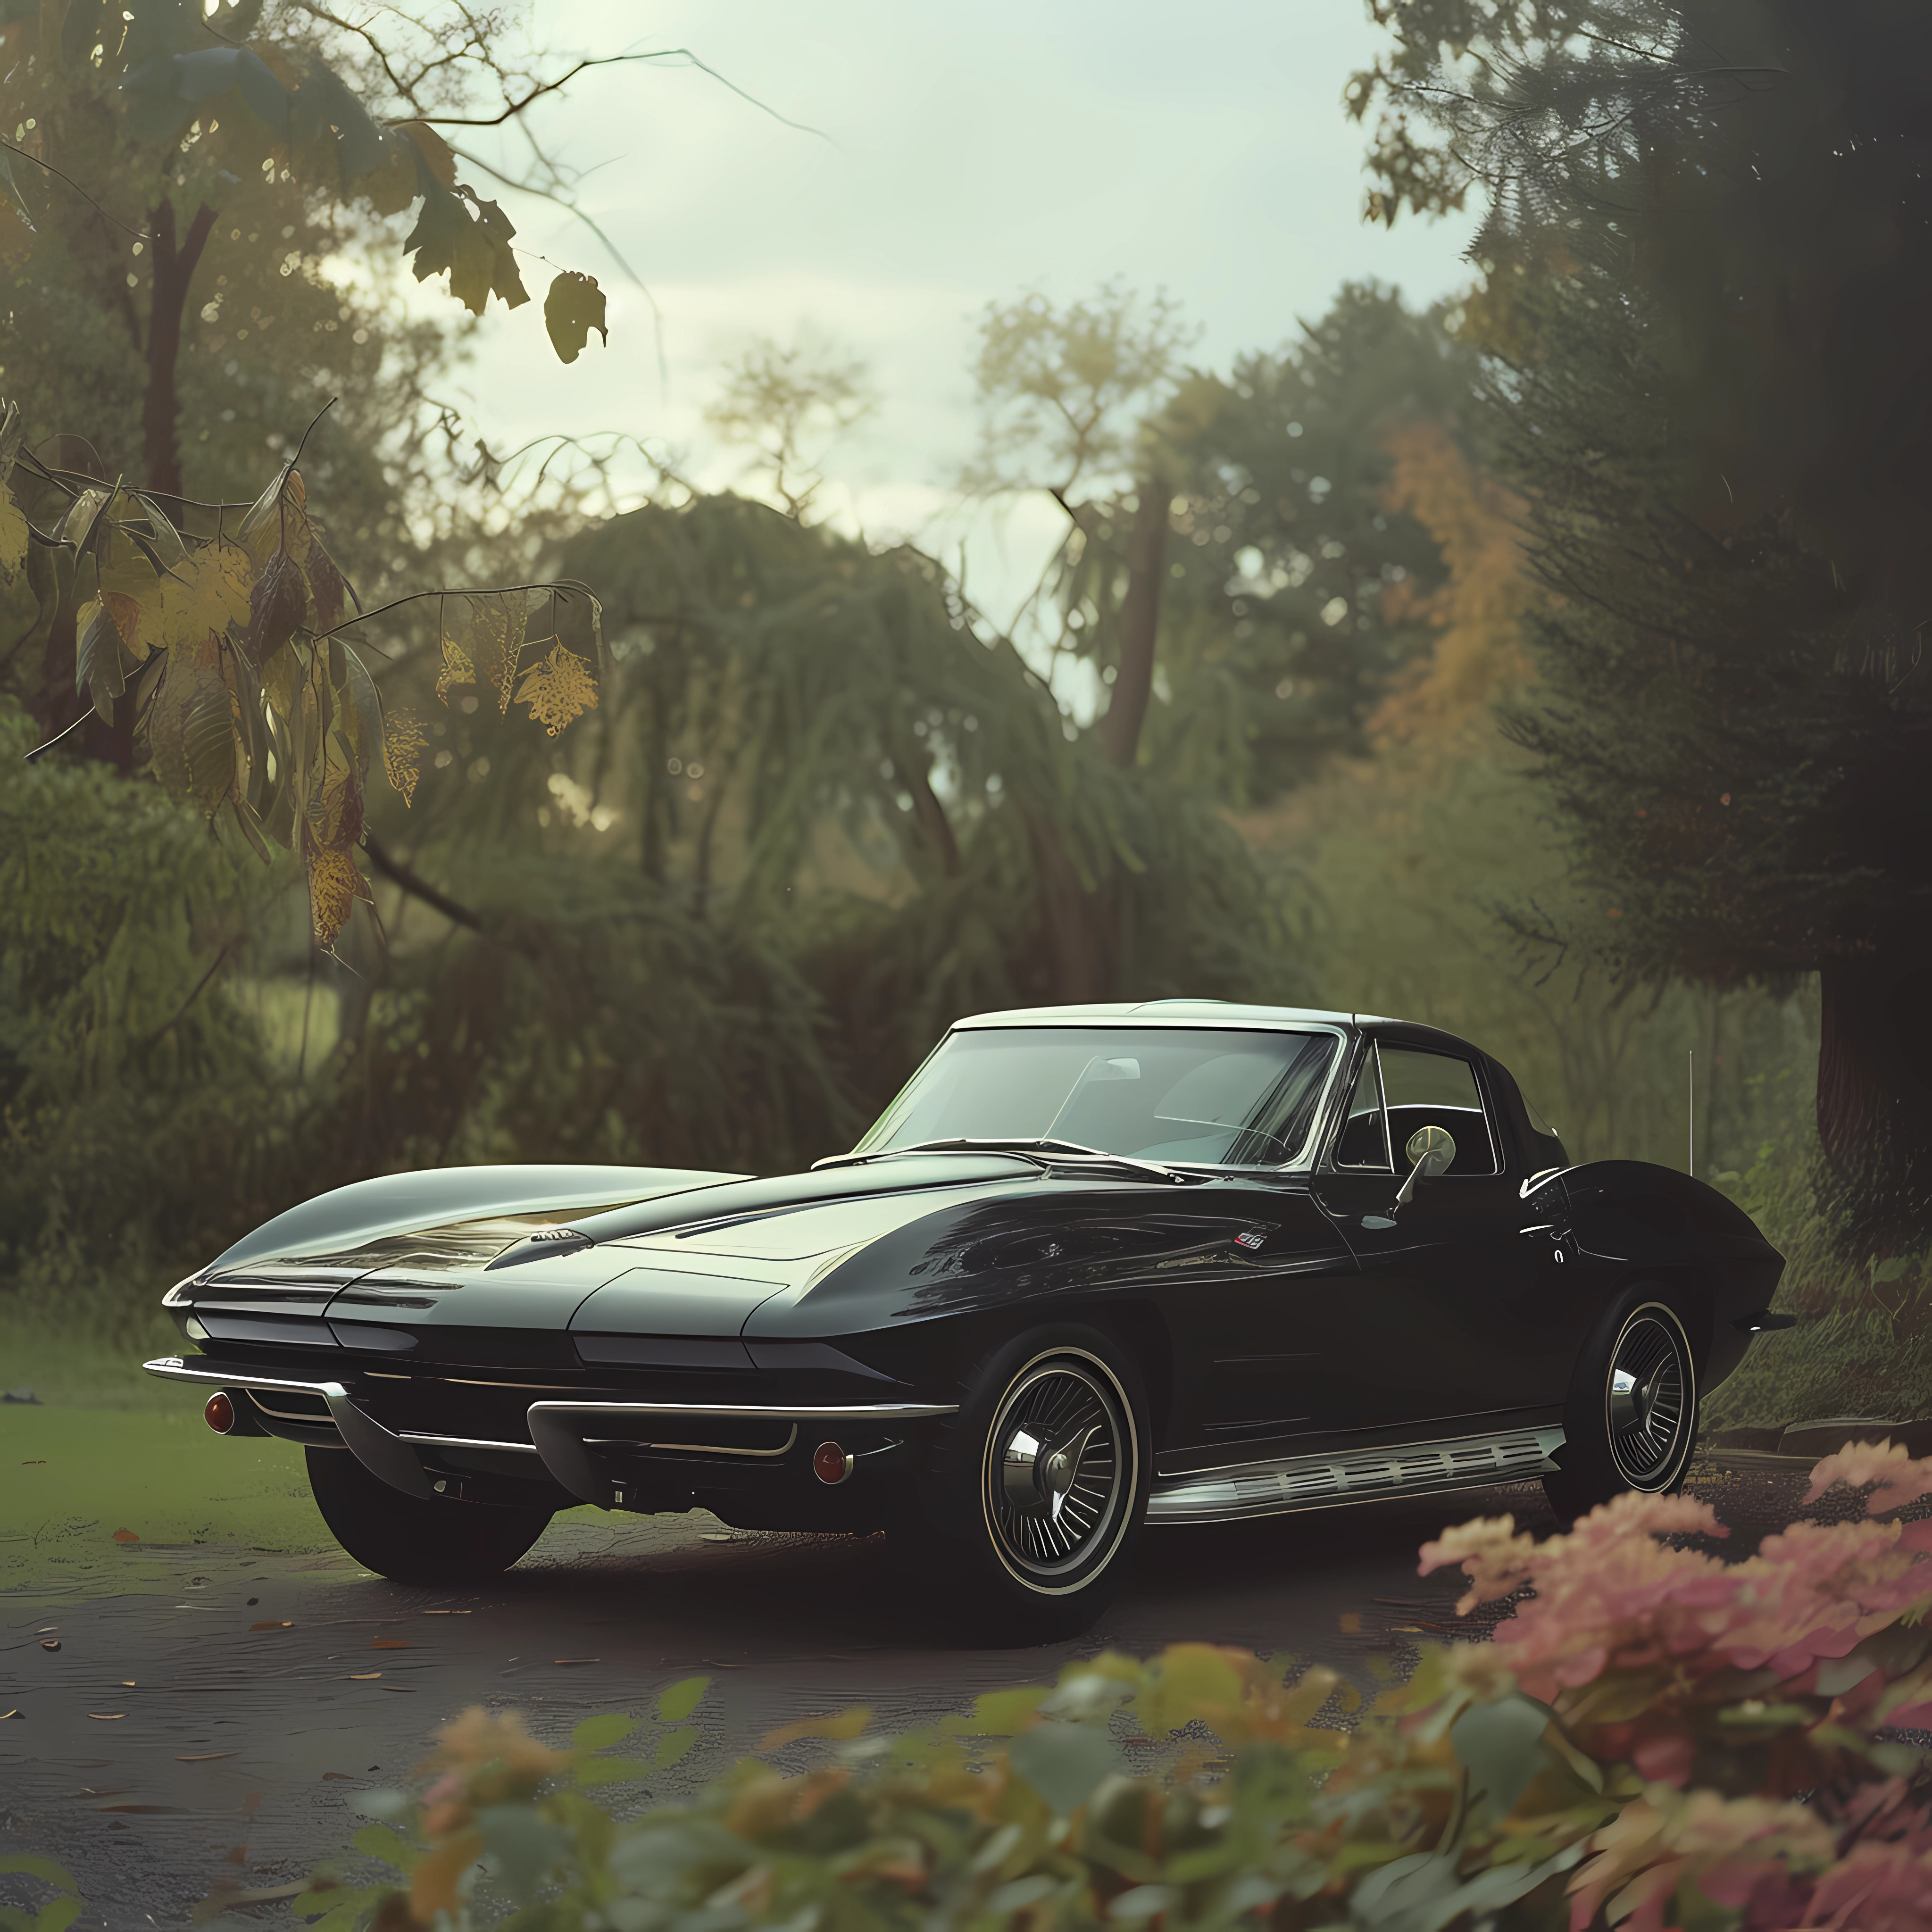 Avatar of a classic Chevrolet Corvette Stingray parked outdoors with a backdrop of trees and flowers, showcasing its sleek black design.